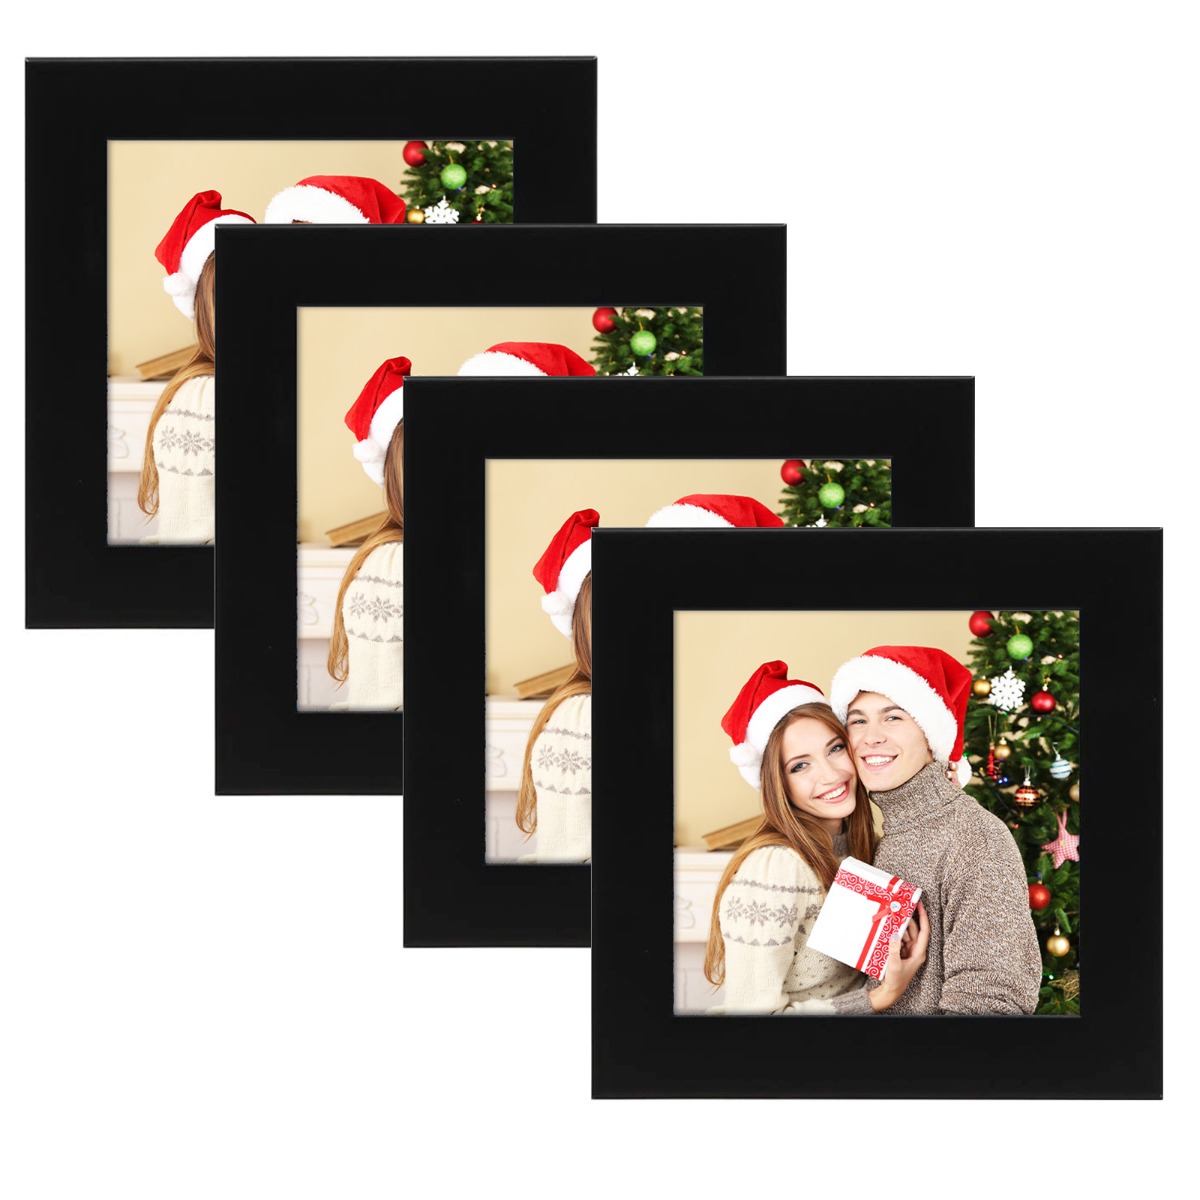 Golden State Art, 6x6 Black Photo Frame-Display Photos 4x4 with White Mat  or 6x6 without Mat - Solid Wood, Real Glass, Set of 4 (Wall Display)